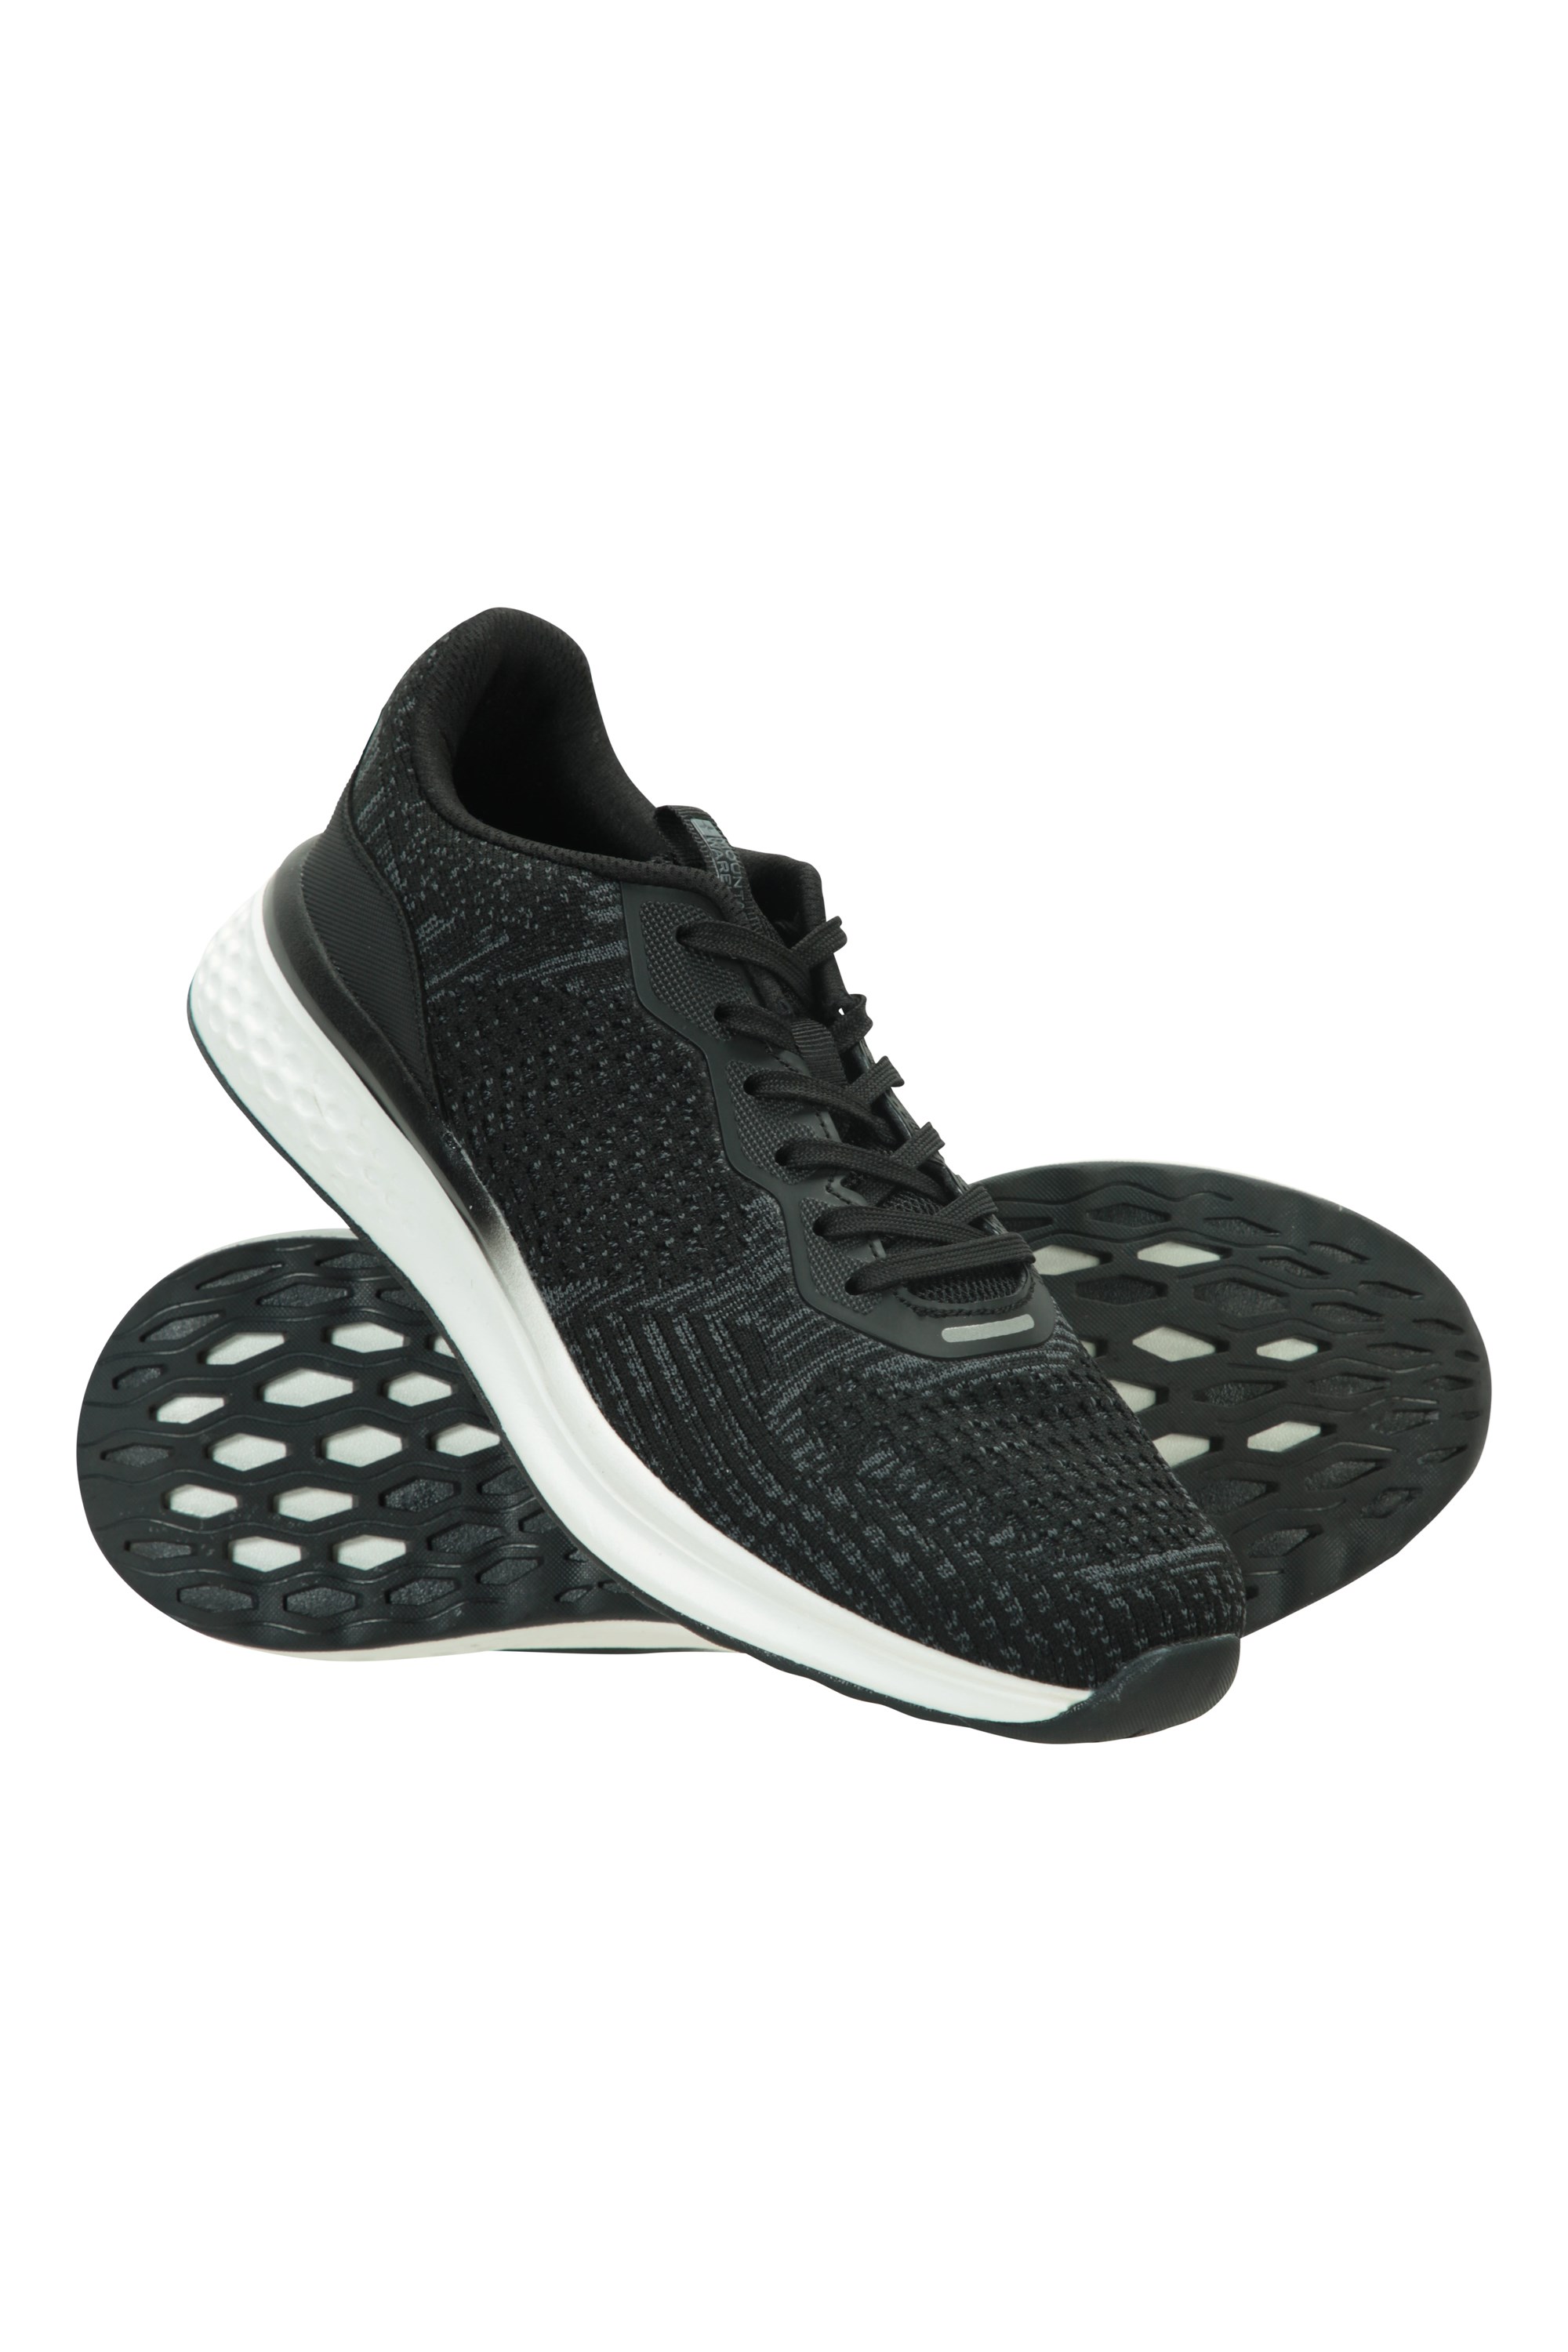 Evolution Womens Recycled Mesh Active Shoes - Black